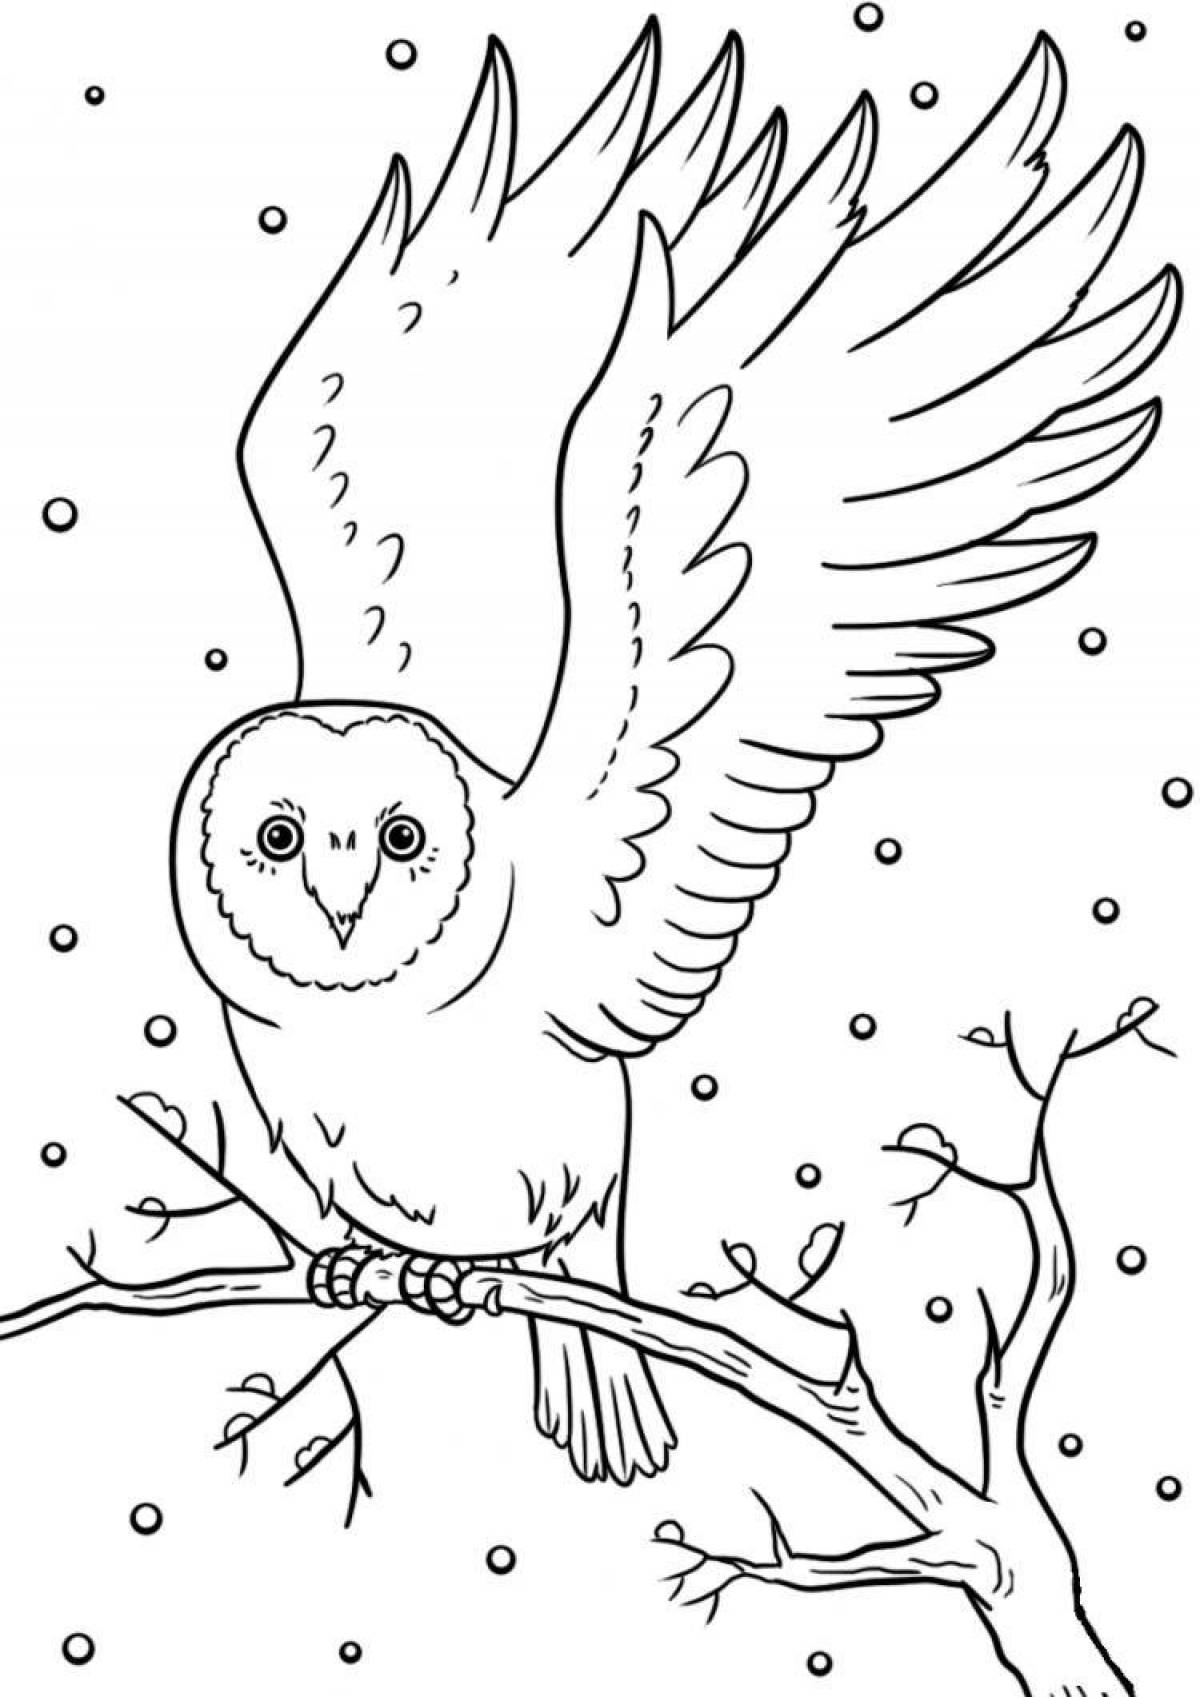 Coloring pages of wintering birds for children 3-4 years old